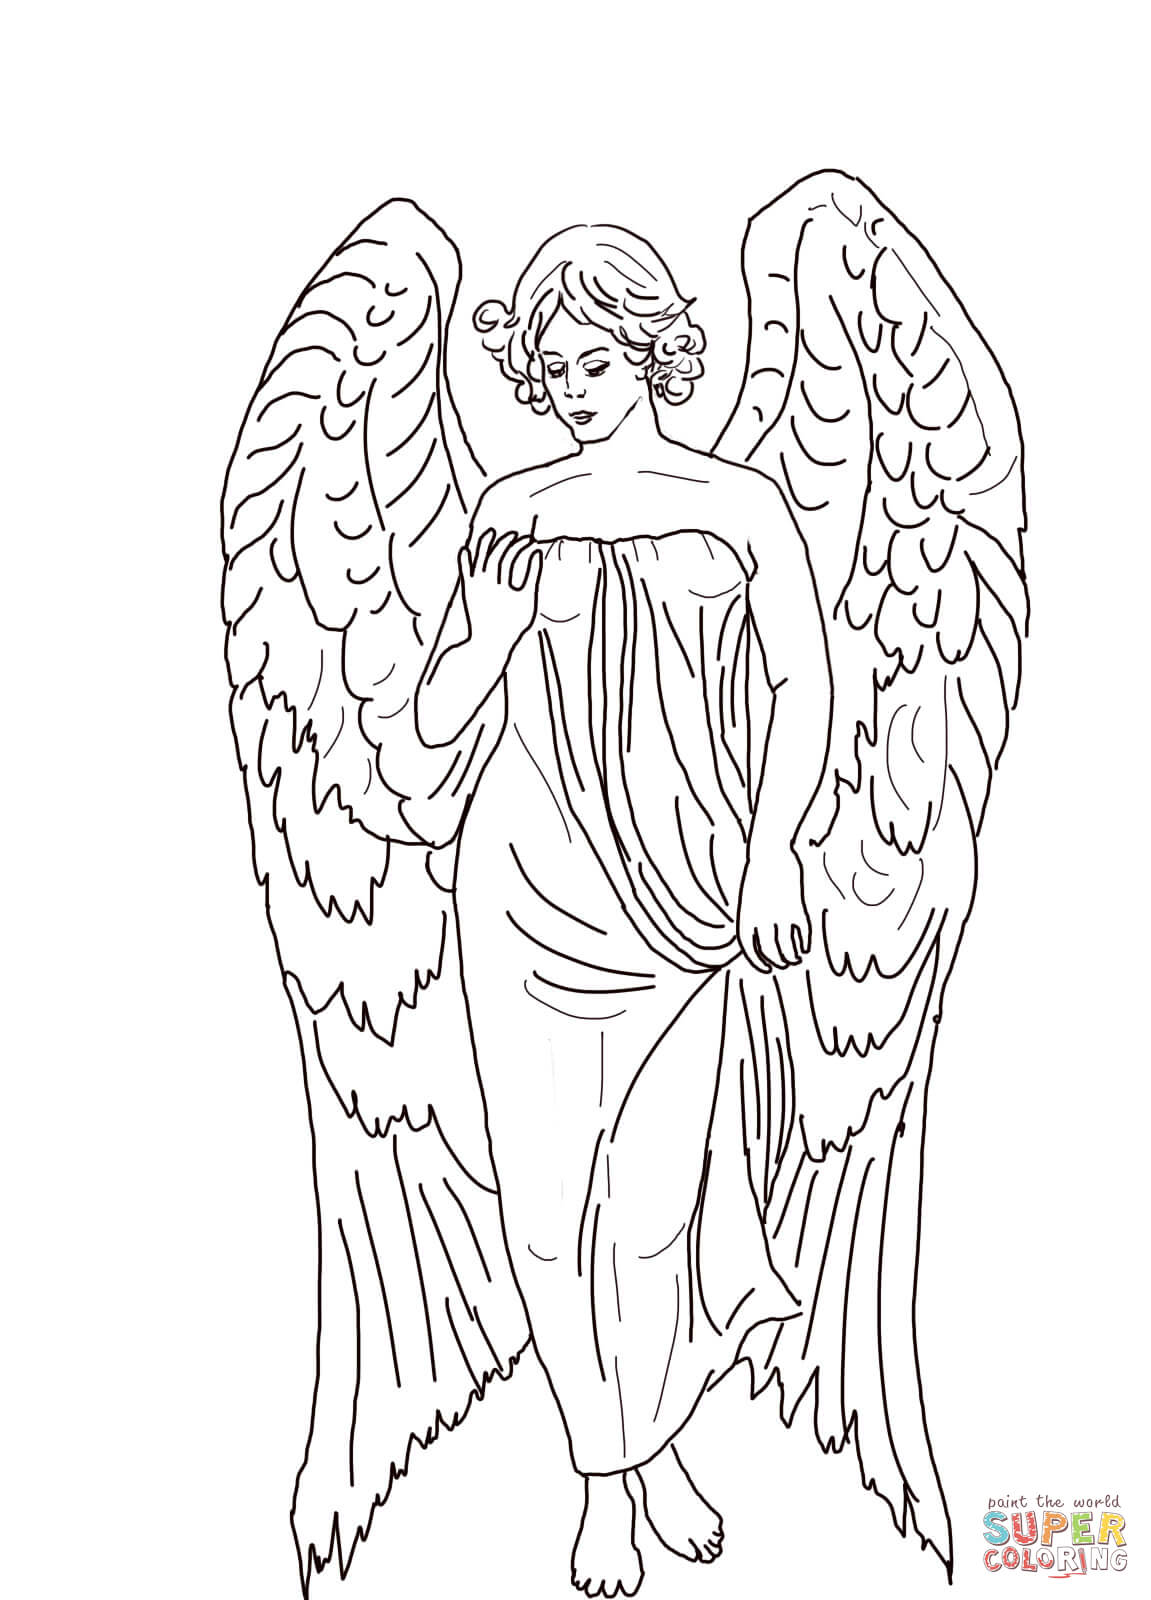 Guardian Angel coloring page | Free Printable Coloring Pages